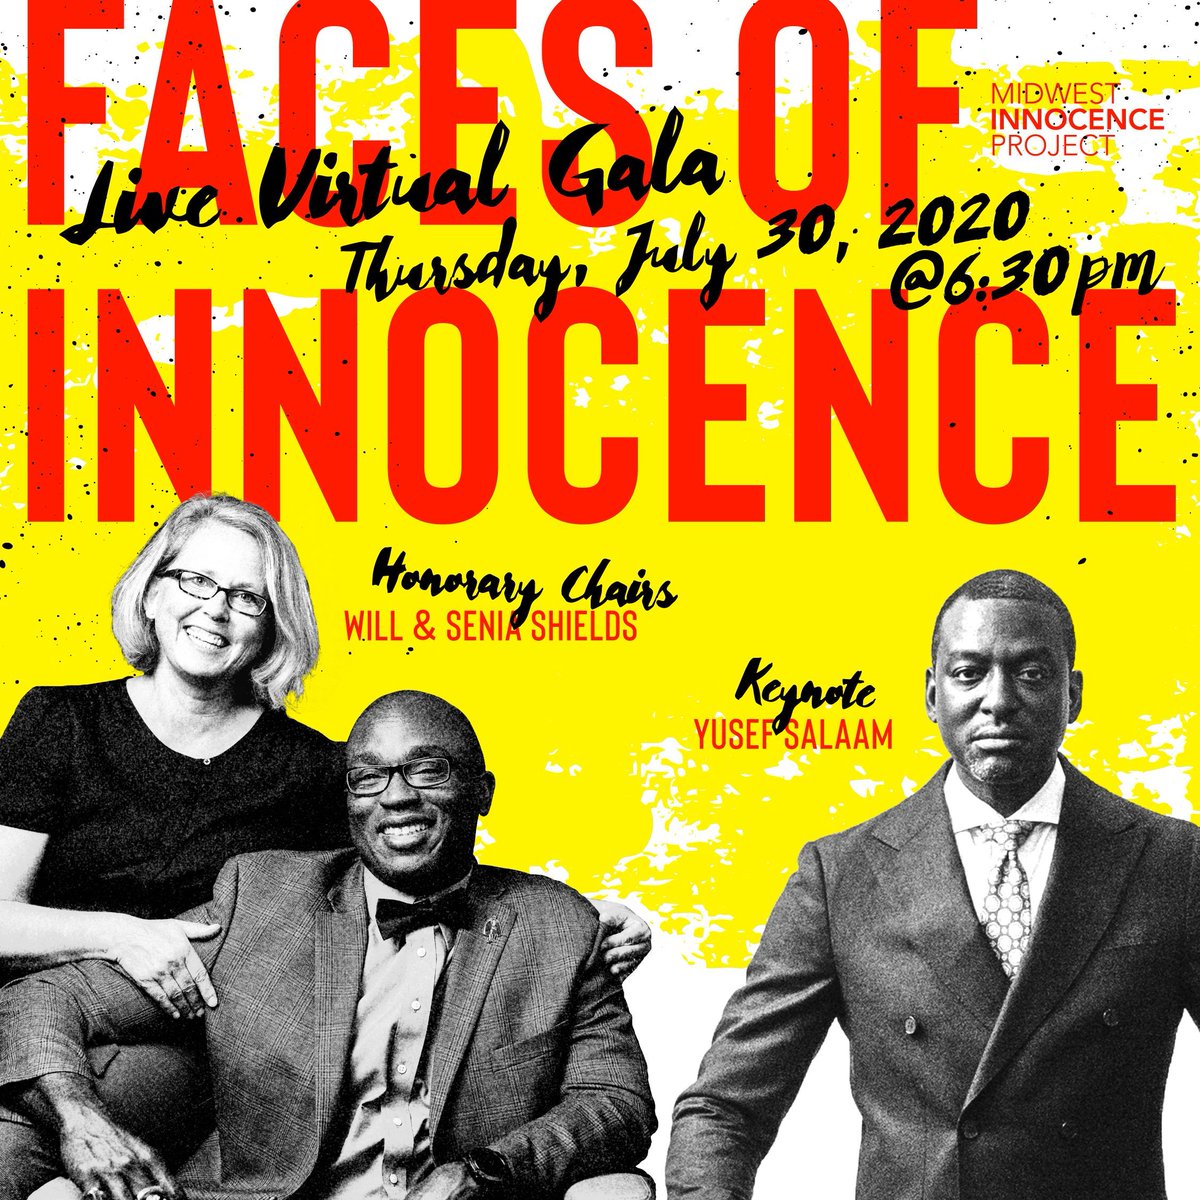 We’re 1 week out from our online Faces of Innocence gala, the event is completely free to attend! Learn from several amazing people in the fight for justice, including our Keynote, @dr_yusefsalaam. ASL interpreters and CC will be provided. Register now! themip-foi.org